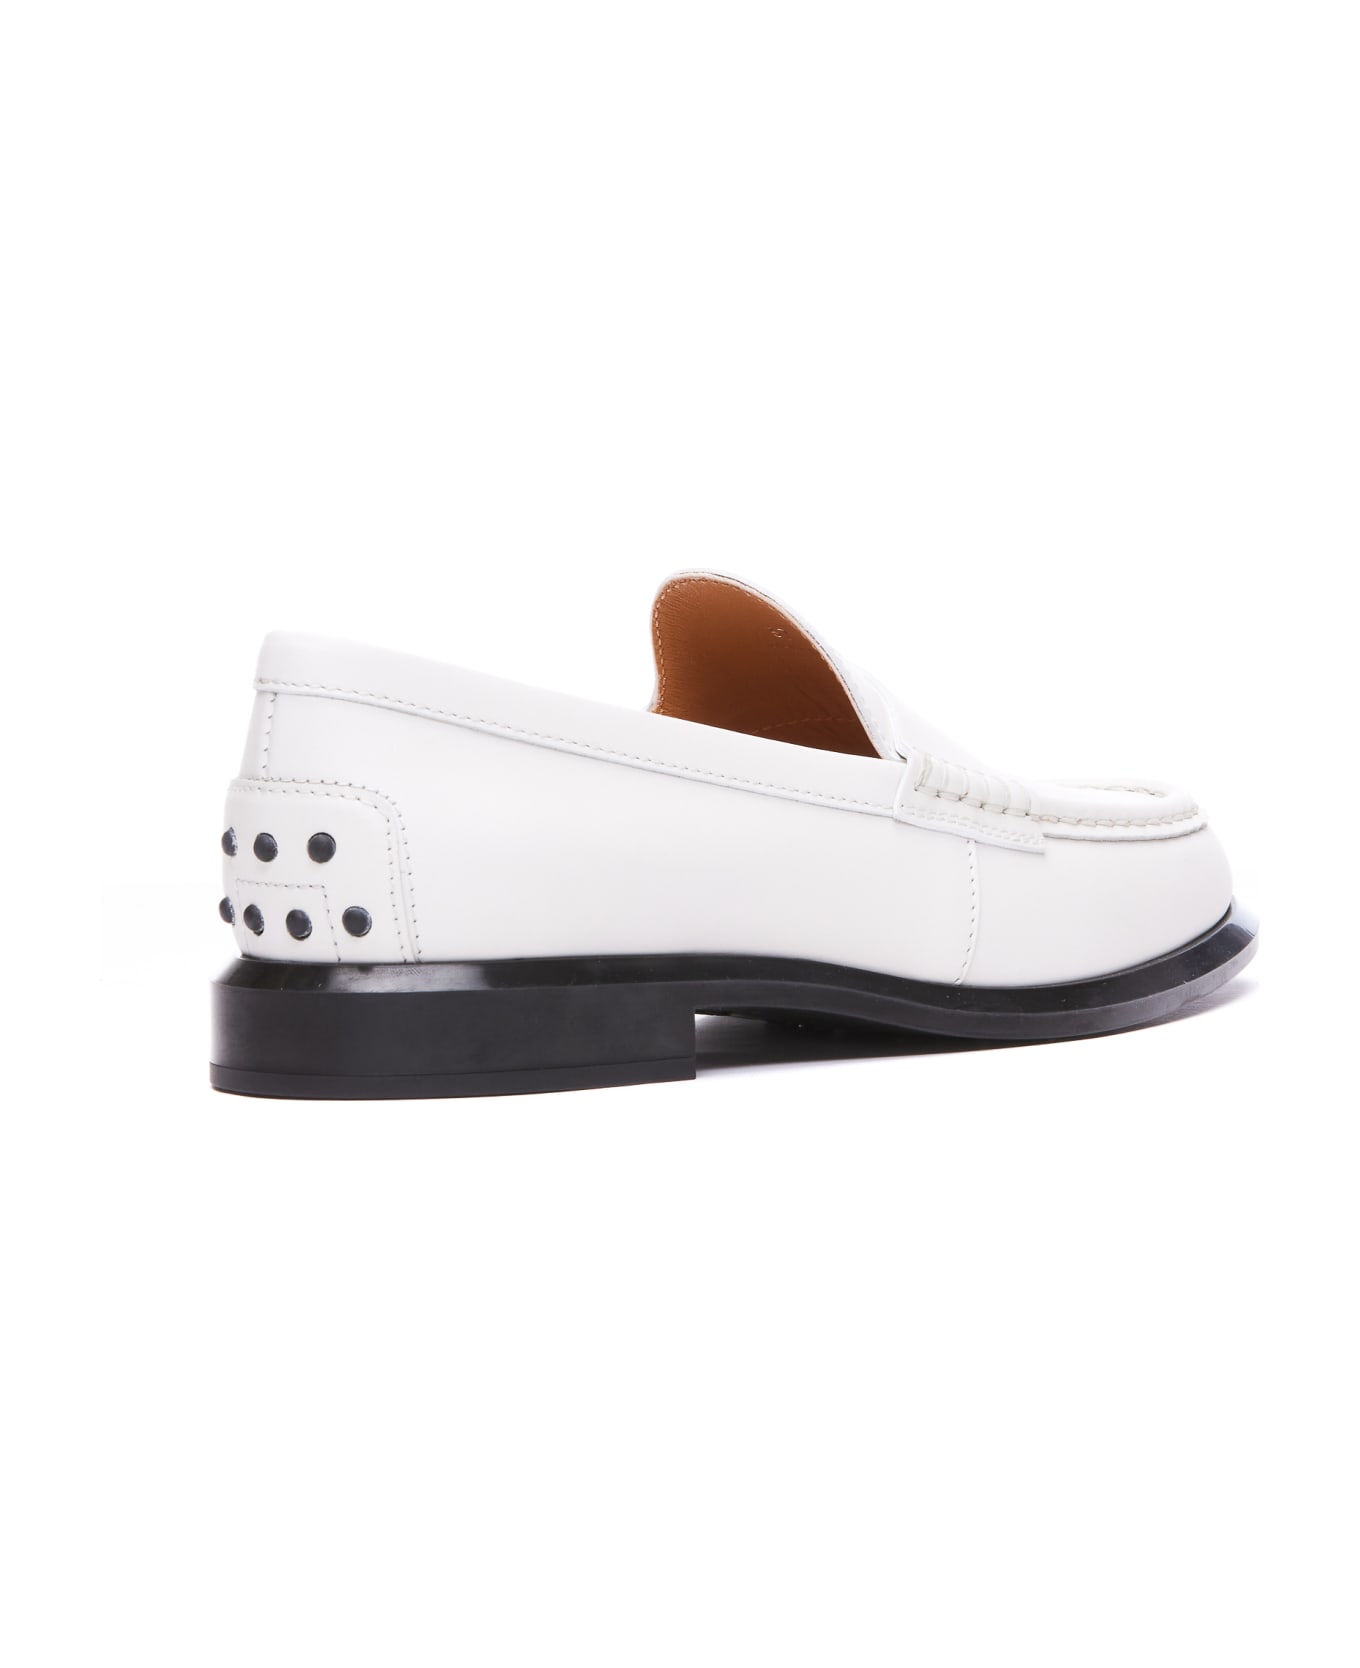 Tod's Kate Loafers - White